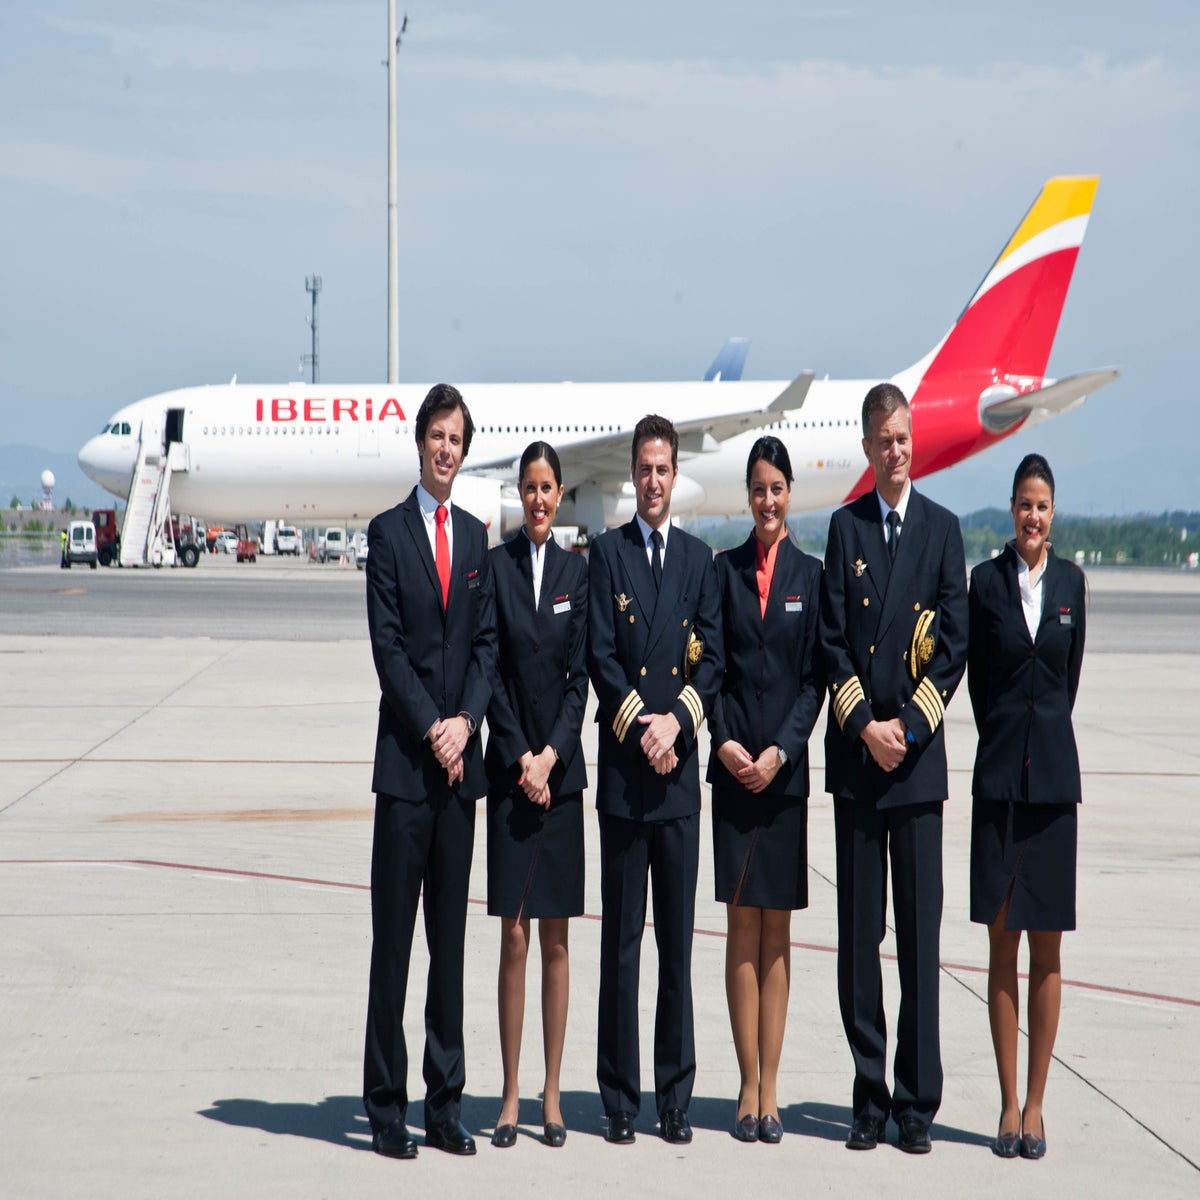 I'm a Flight Attendant, and I Think We Need Better Uniforms